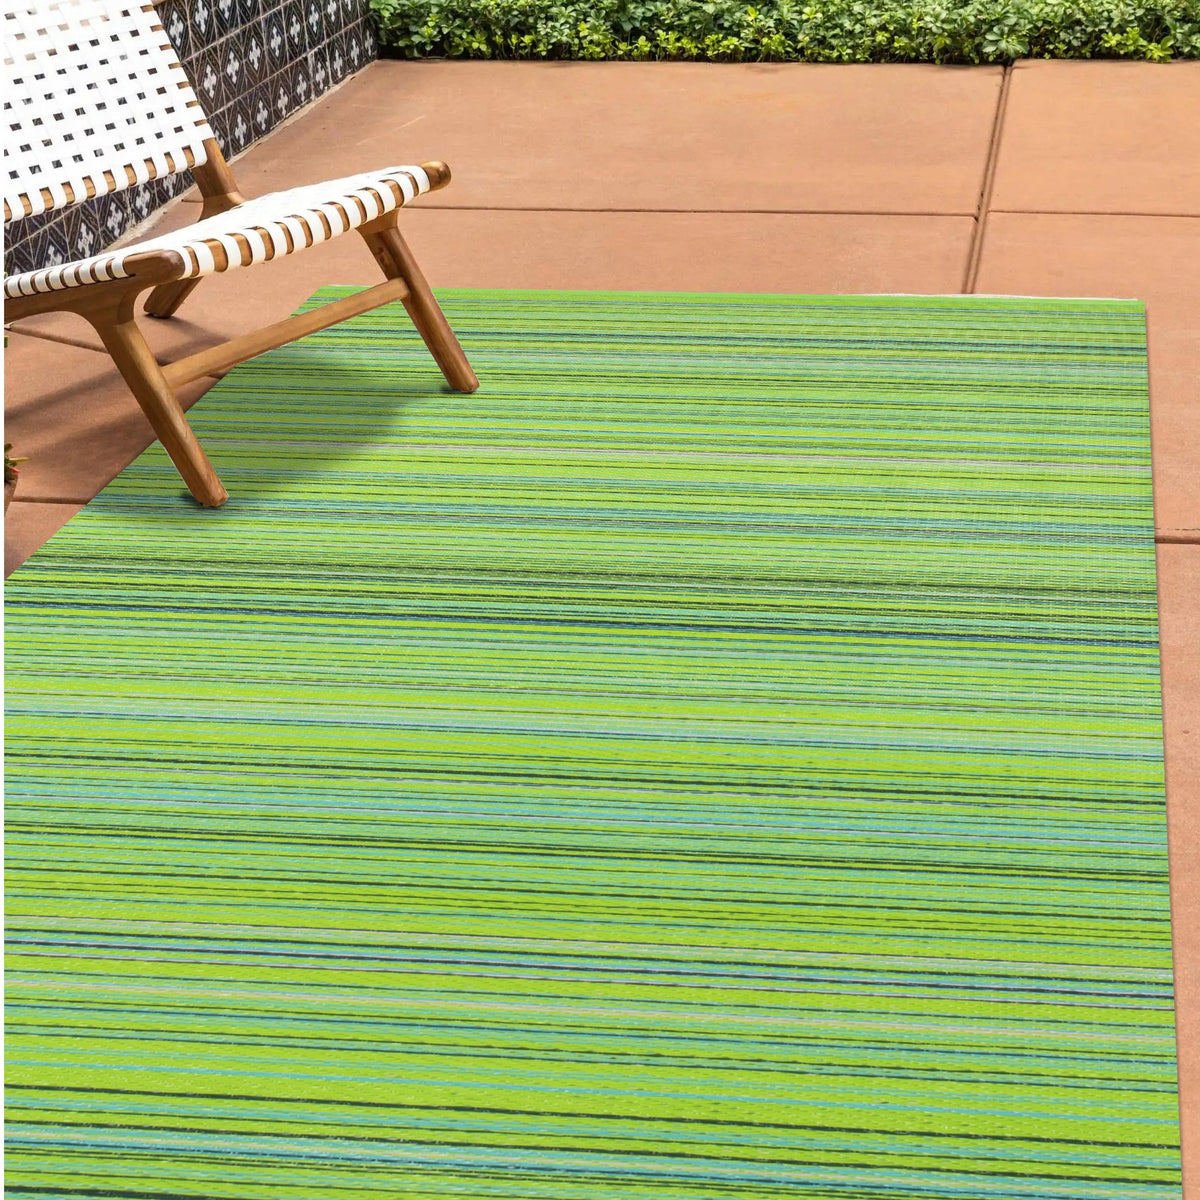 Teal Outdoor Rug Plastic Washable Porch Rugs Water Resistant Garden Patio  Mats